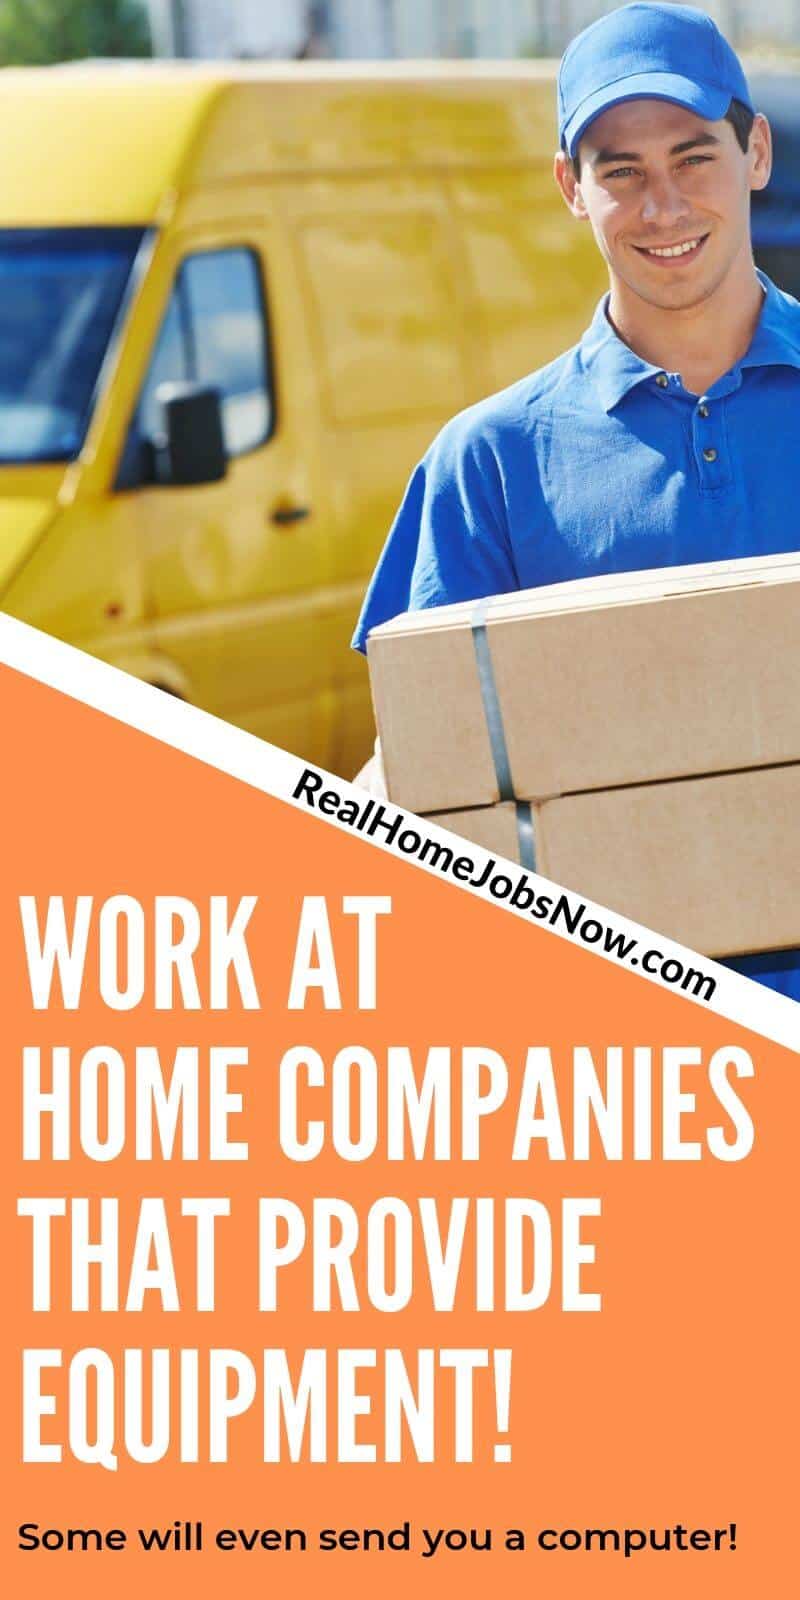 These companies provide legitimate work from home jobs AND equipment! Even if you have no computer, some of these places will send you one for free!  #workfromhome #workfromhomejobs #workfromhomecompanies #workfromhomeonline #workathome #workathomejobs #wahm #onlinejobs #remotejobs #remotework #moneyfromhome